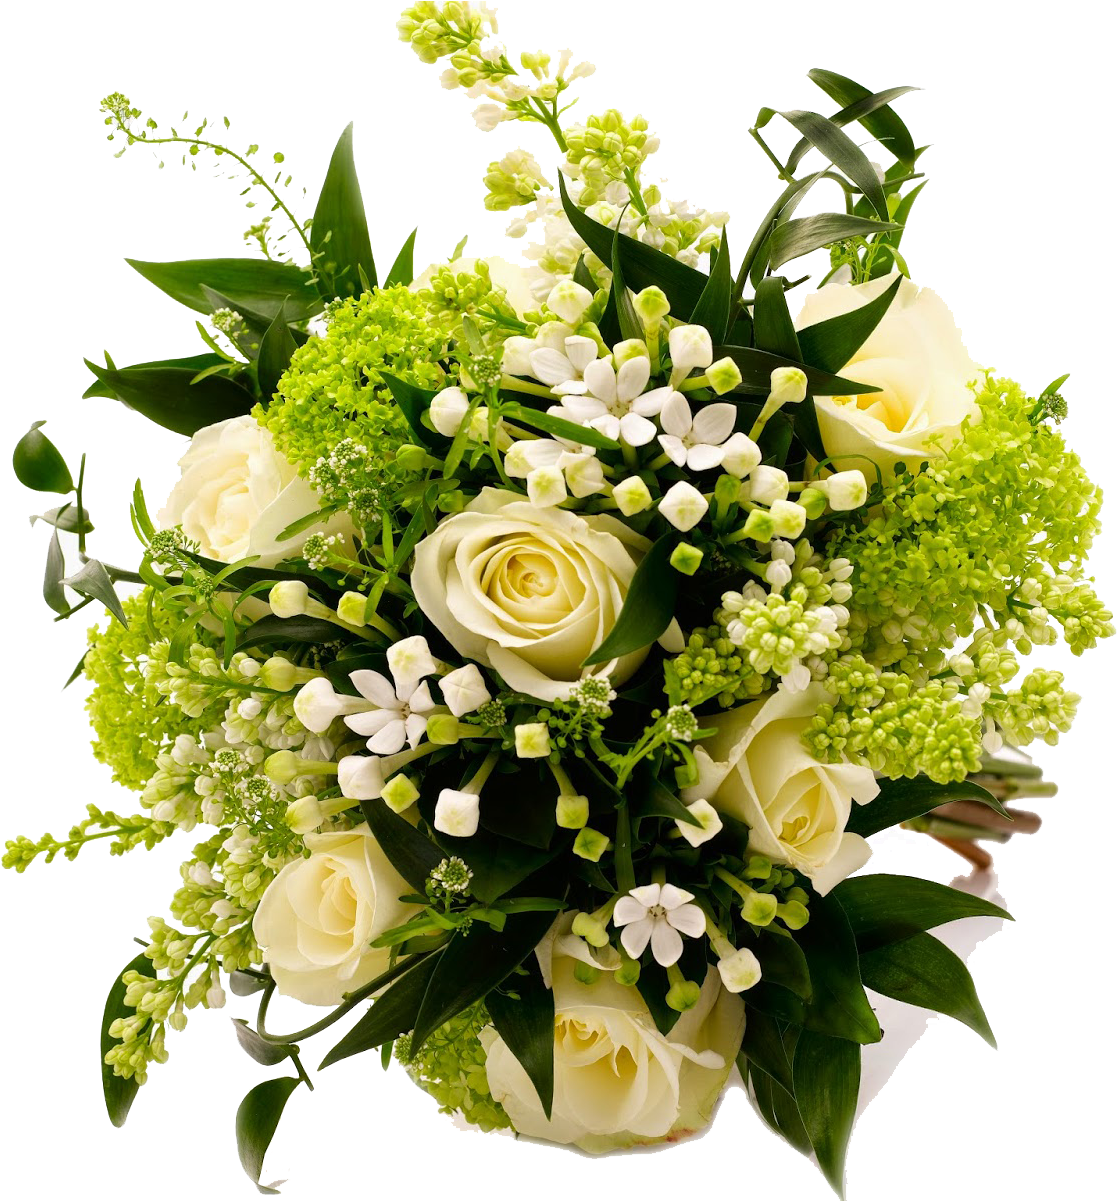 7 Kbytes, Warehouse, Hq - Wedding Bouquet Of Flowers Png (1600x1200)